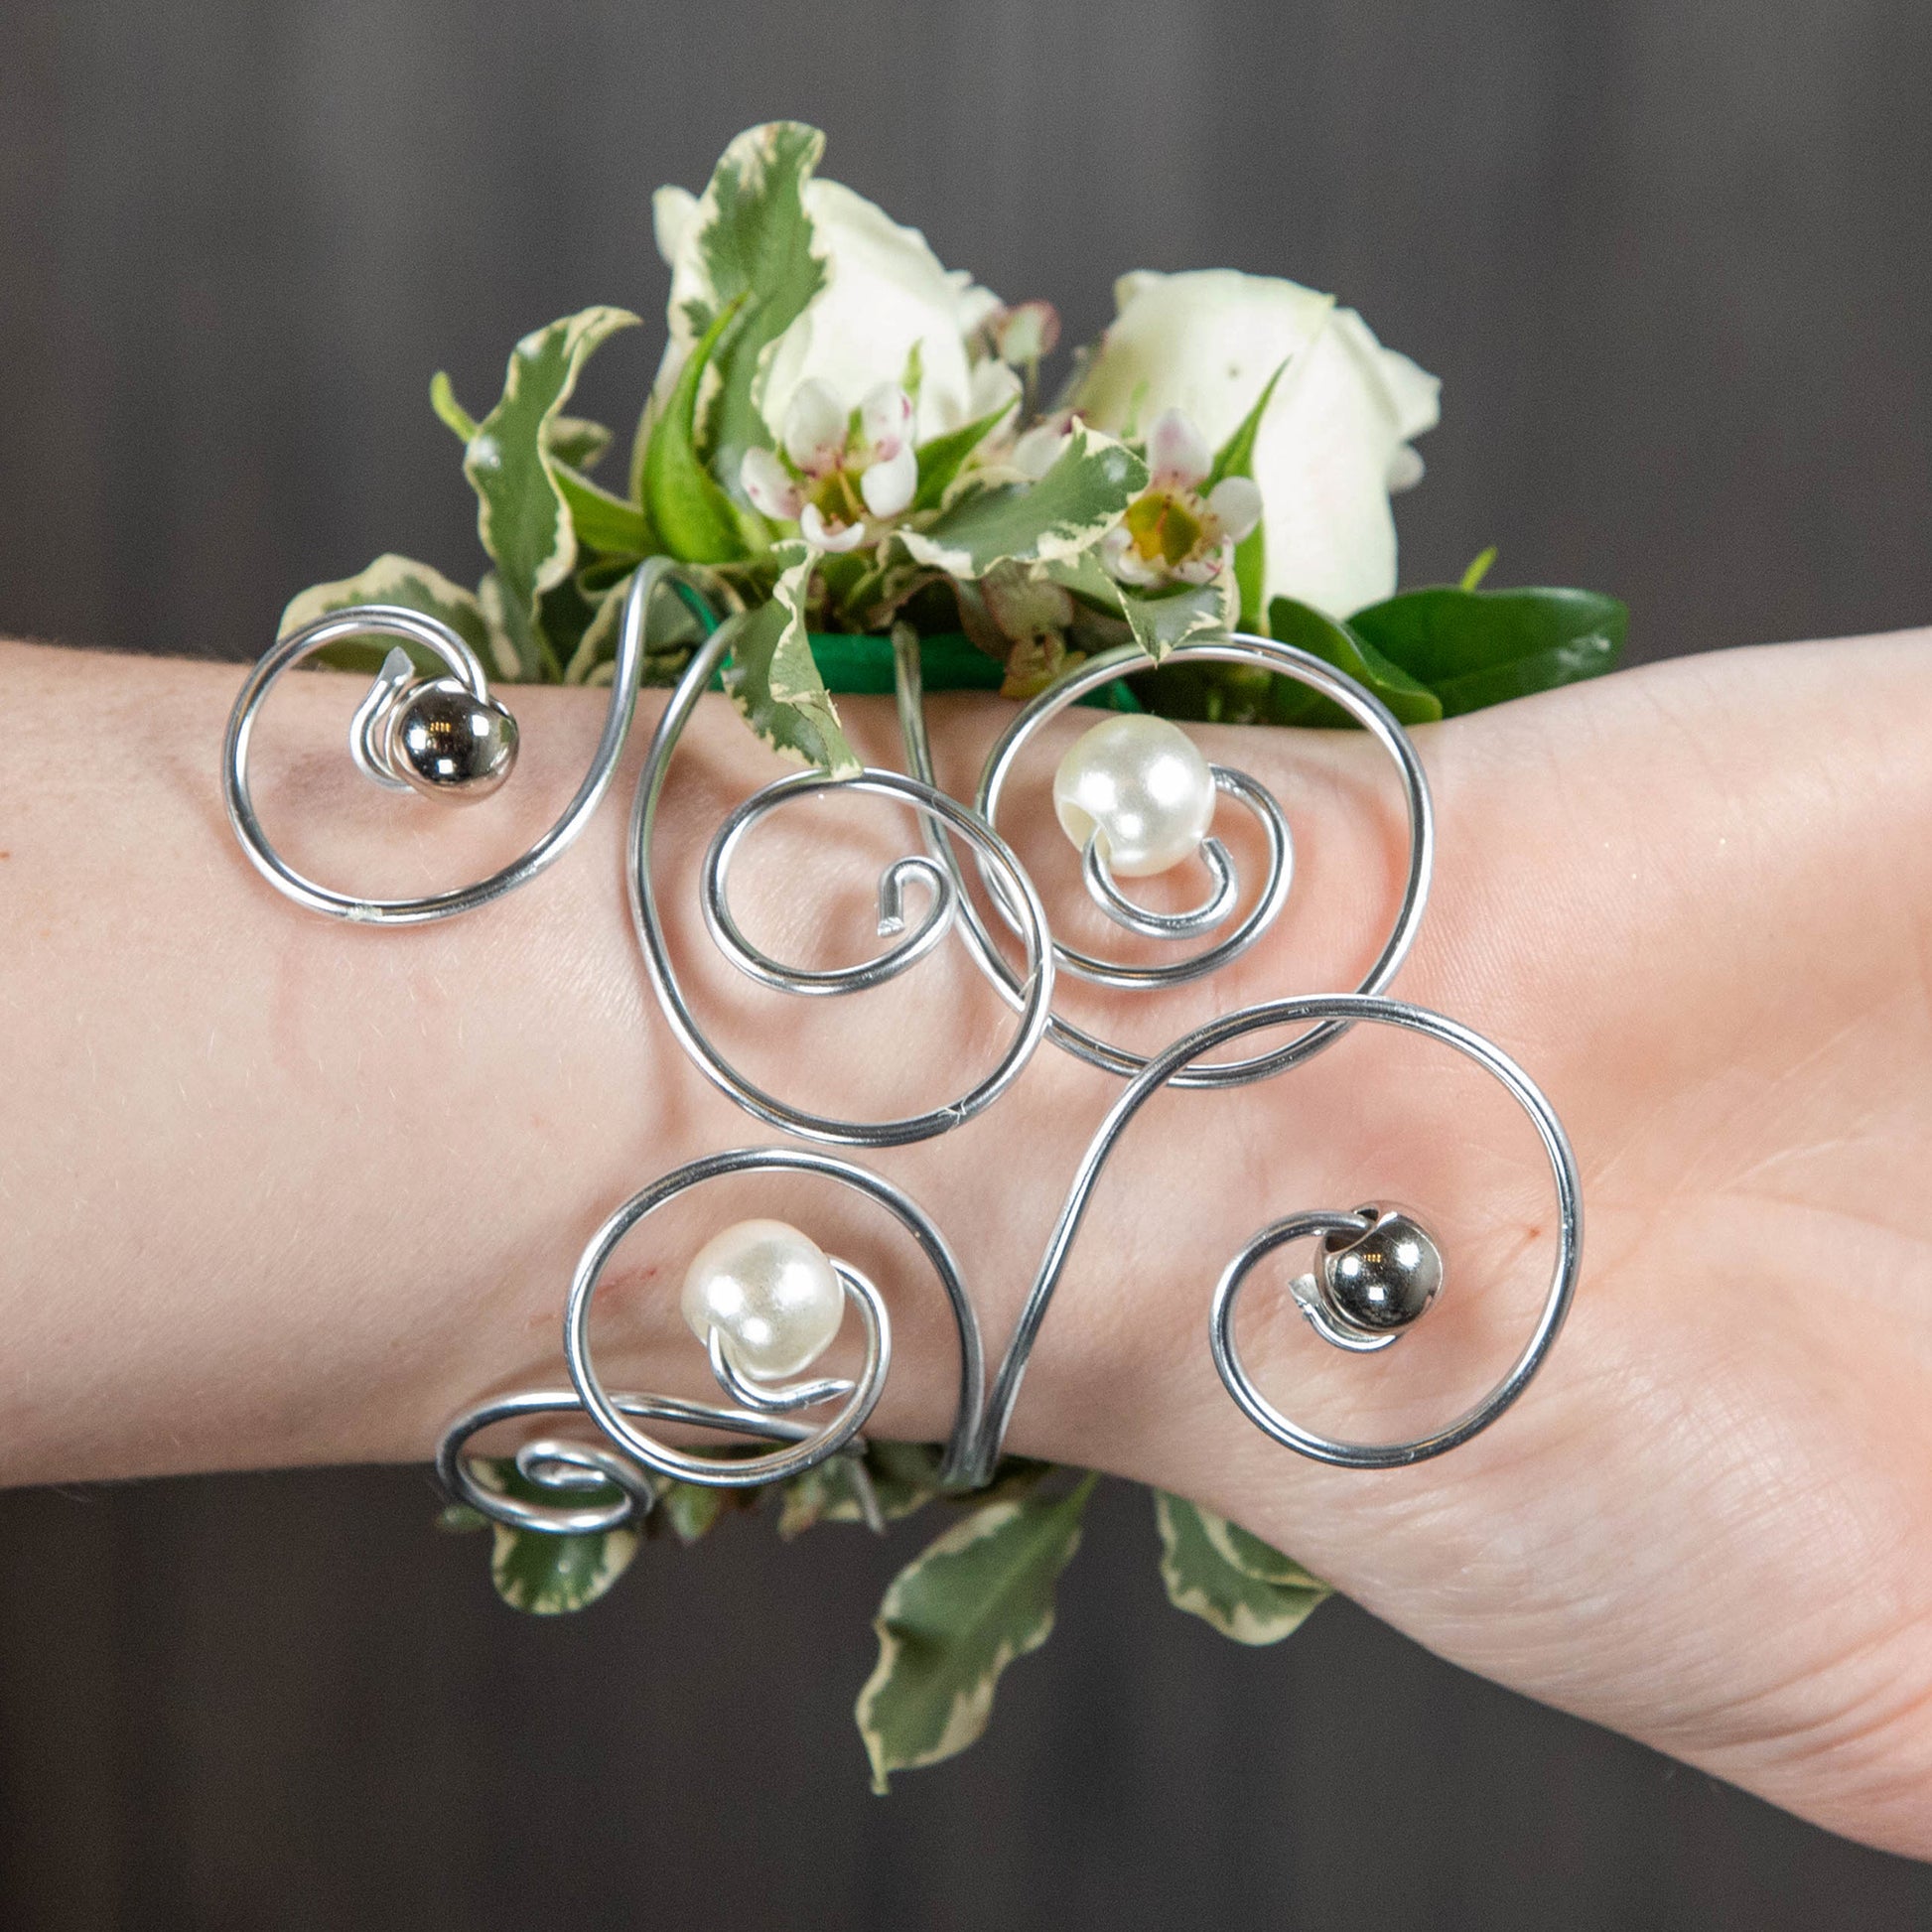 the underside of the wrist corsage showing a curled wire bracelet